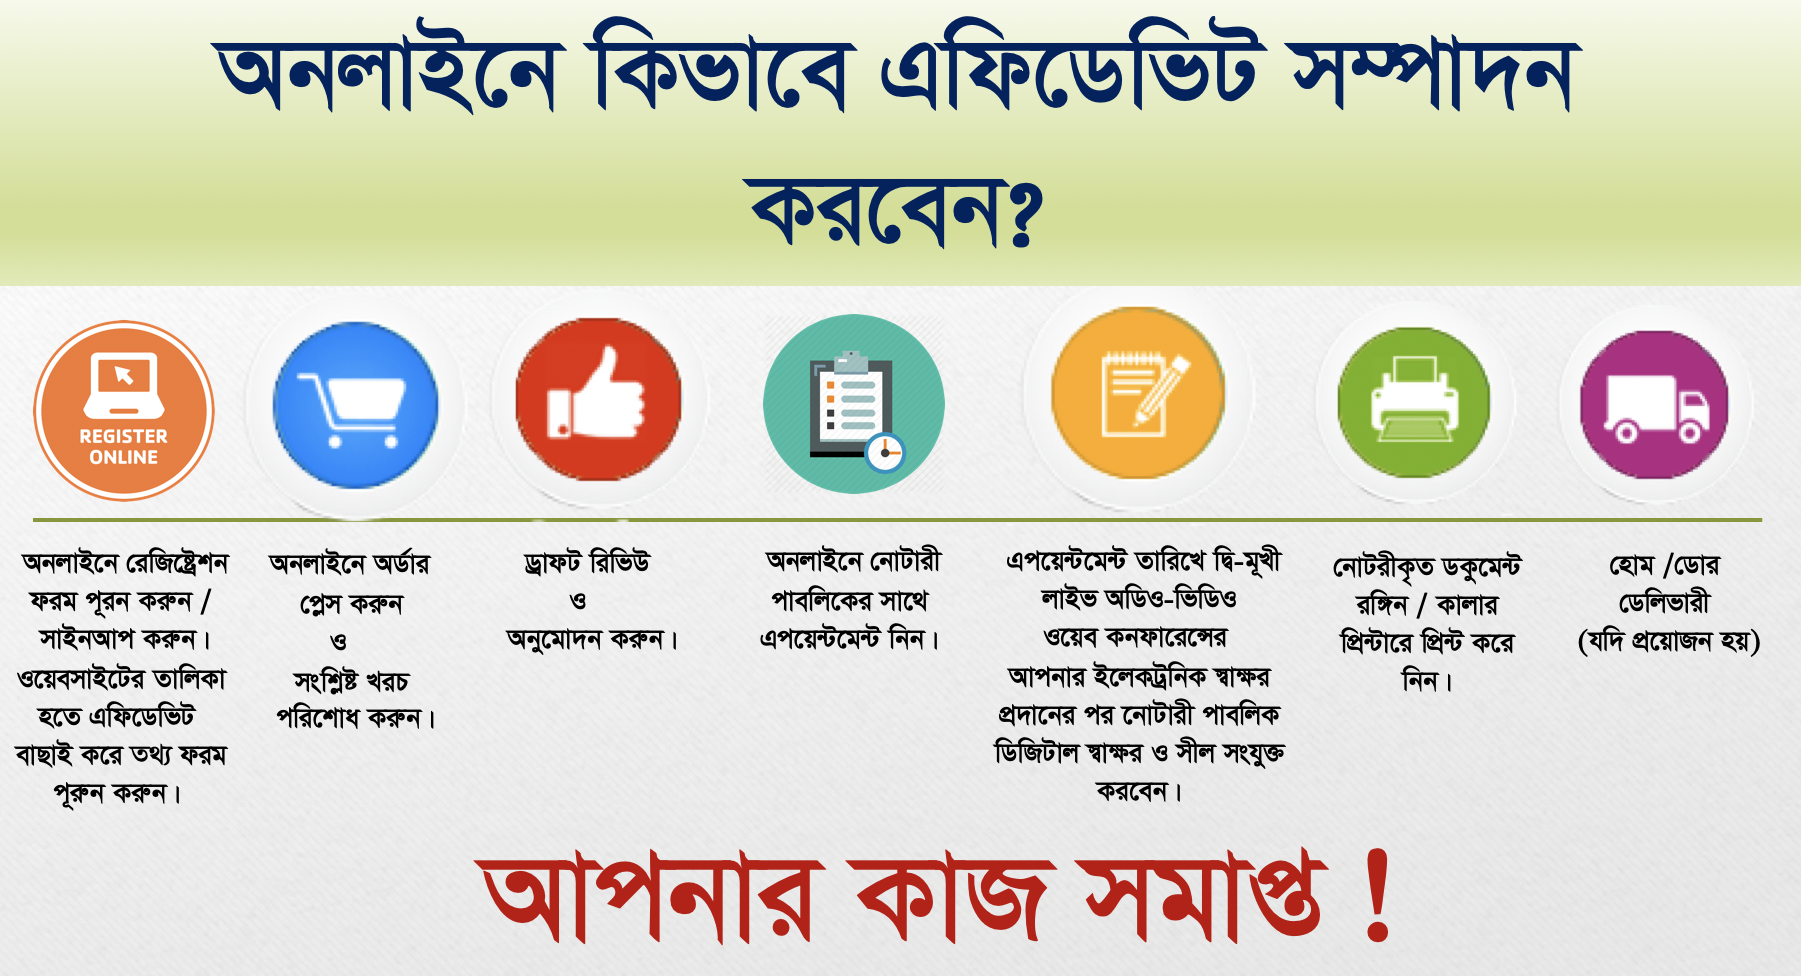 How To Make Correction In Birth Certificate In Bangladesh